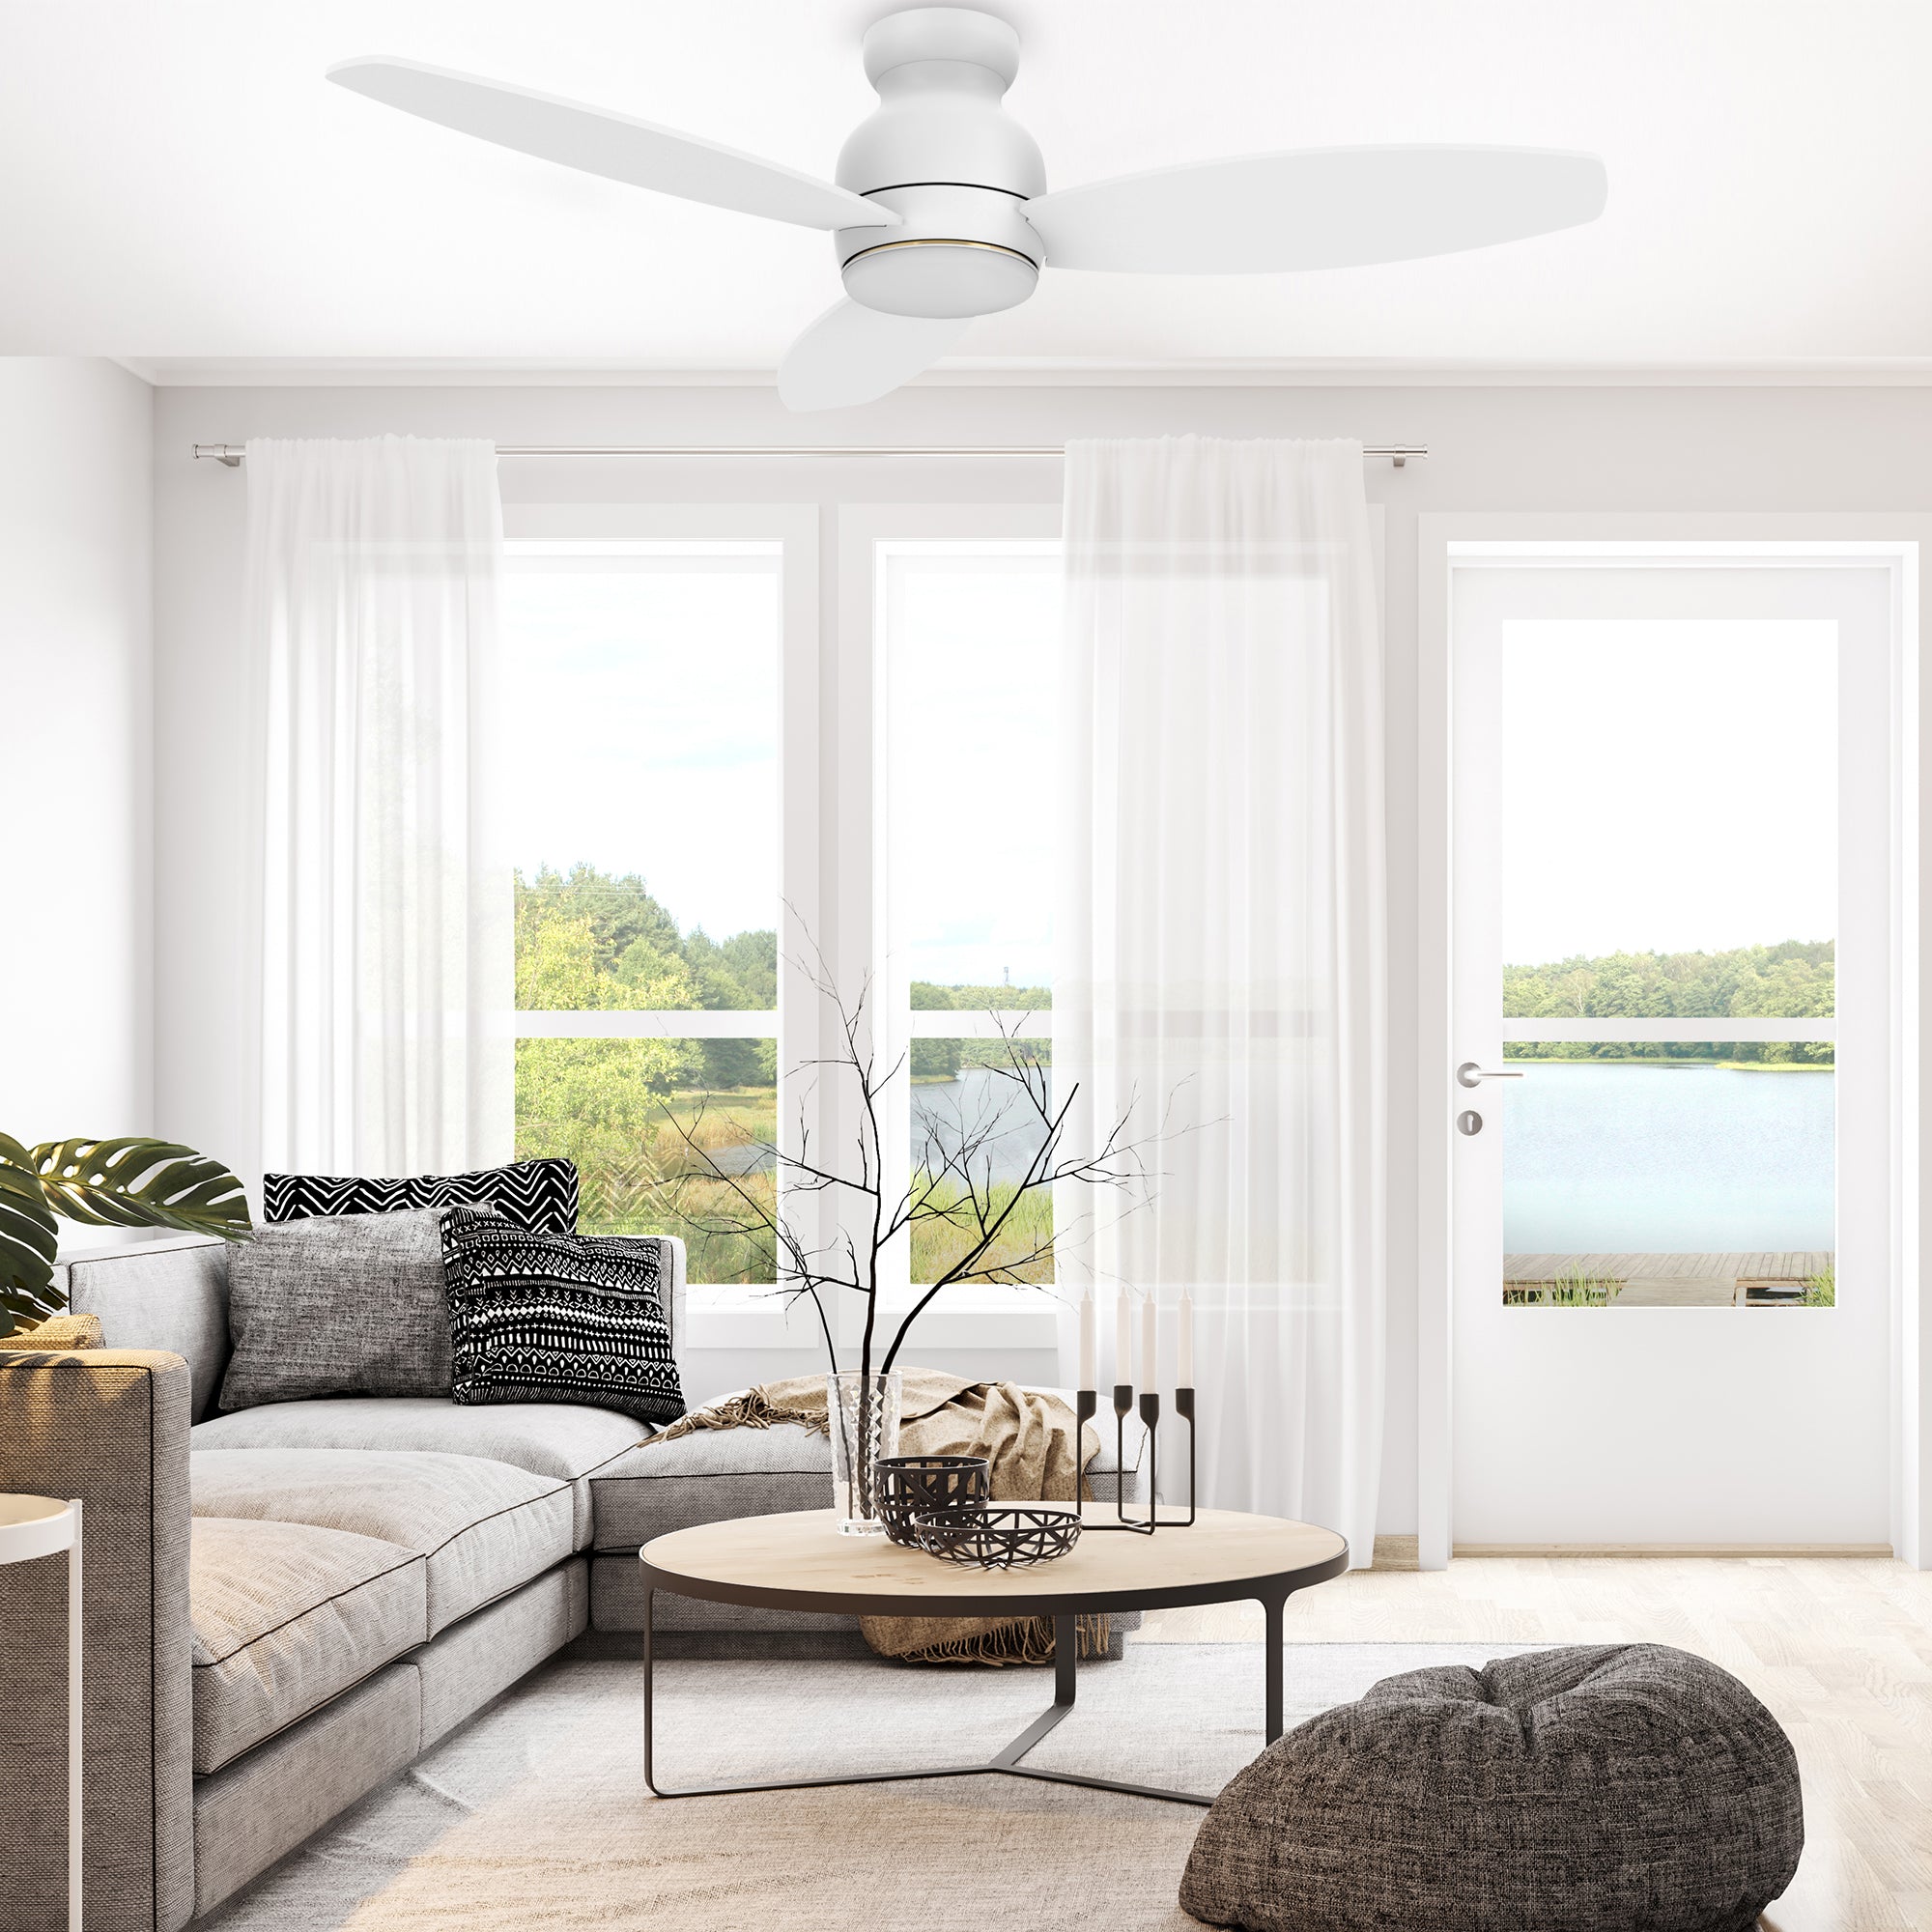 The Smafan 52&#39;&#39; Trendsetter smart ceiling fan keeps your space cool, bright, and stylish. It is a soft modern masterpiece perfect for your large indoor living spaces. This Wifi smart ceiling fan is a simplicity designing with Black finish, use elegant Plywood blades and has an integrated 4000K LED daylight. The fan features Remote control, Wi-Fi apps, Siri Shortcut and Voice control technology (compatible with Amazon Alexa and Google Home Assistant ) to set fan preferences.